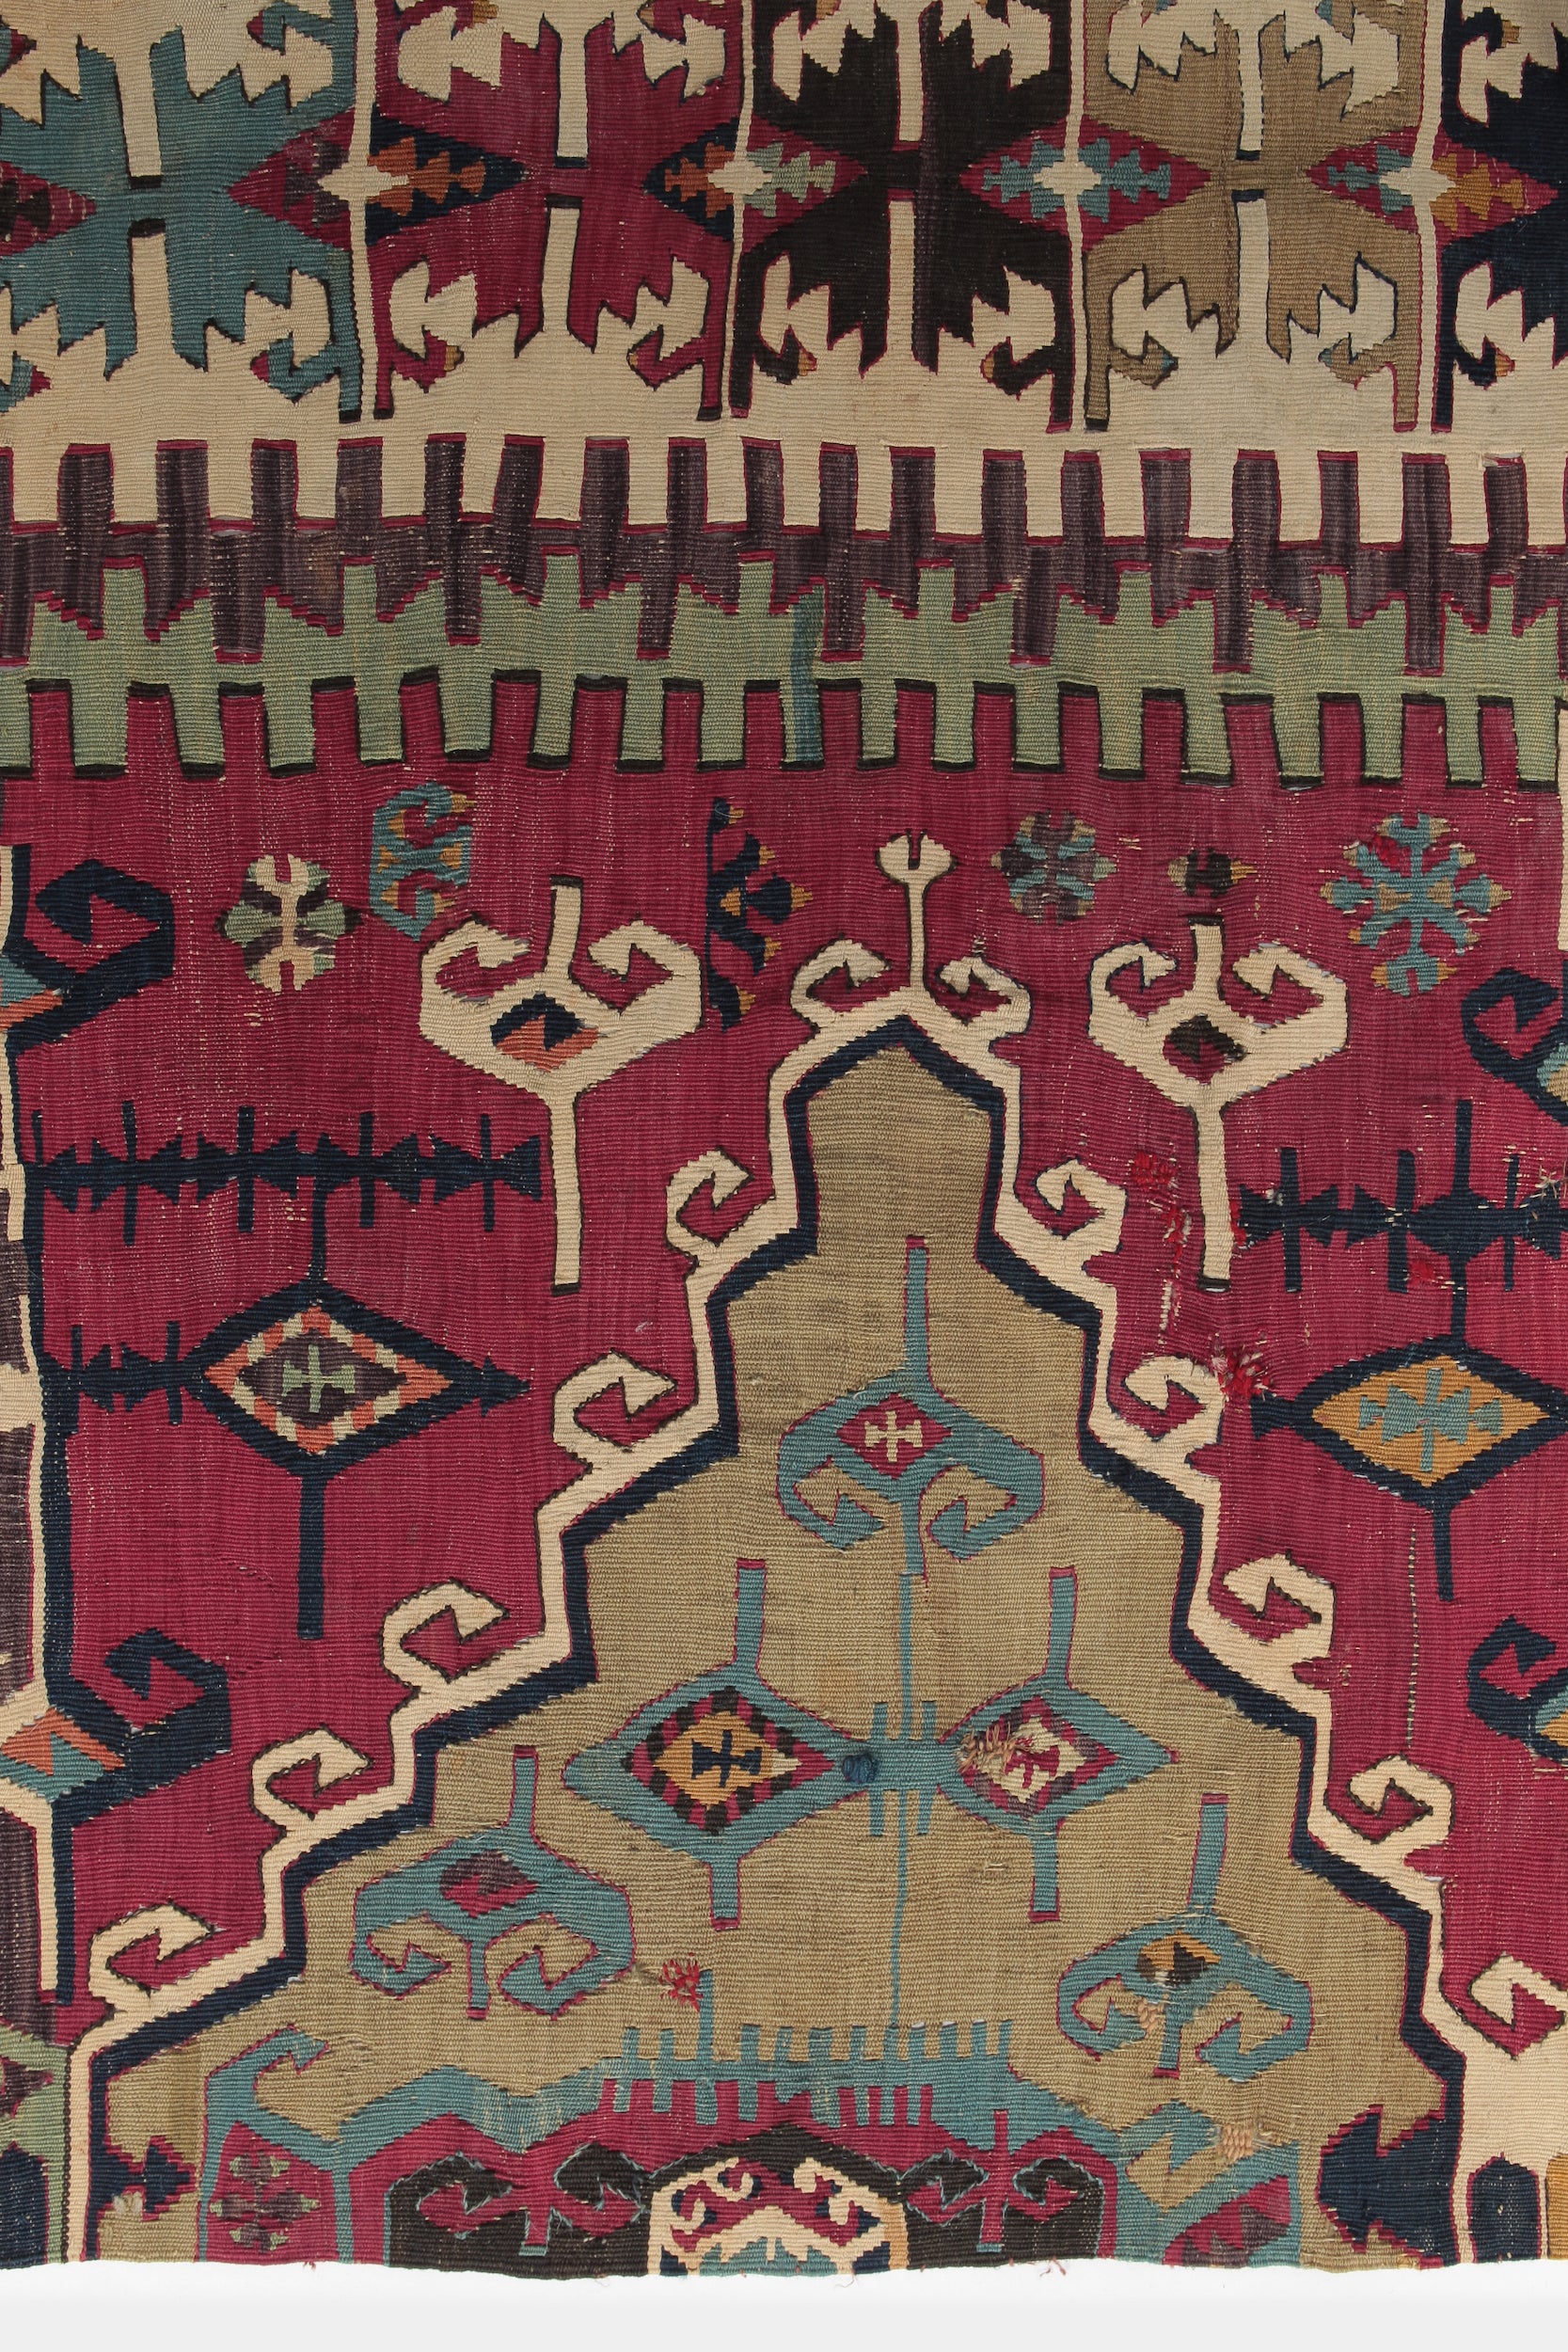 Antique kilim from Turkey, collector’s item